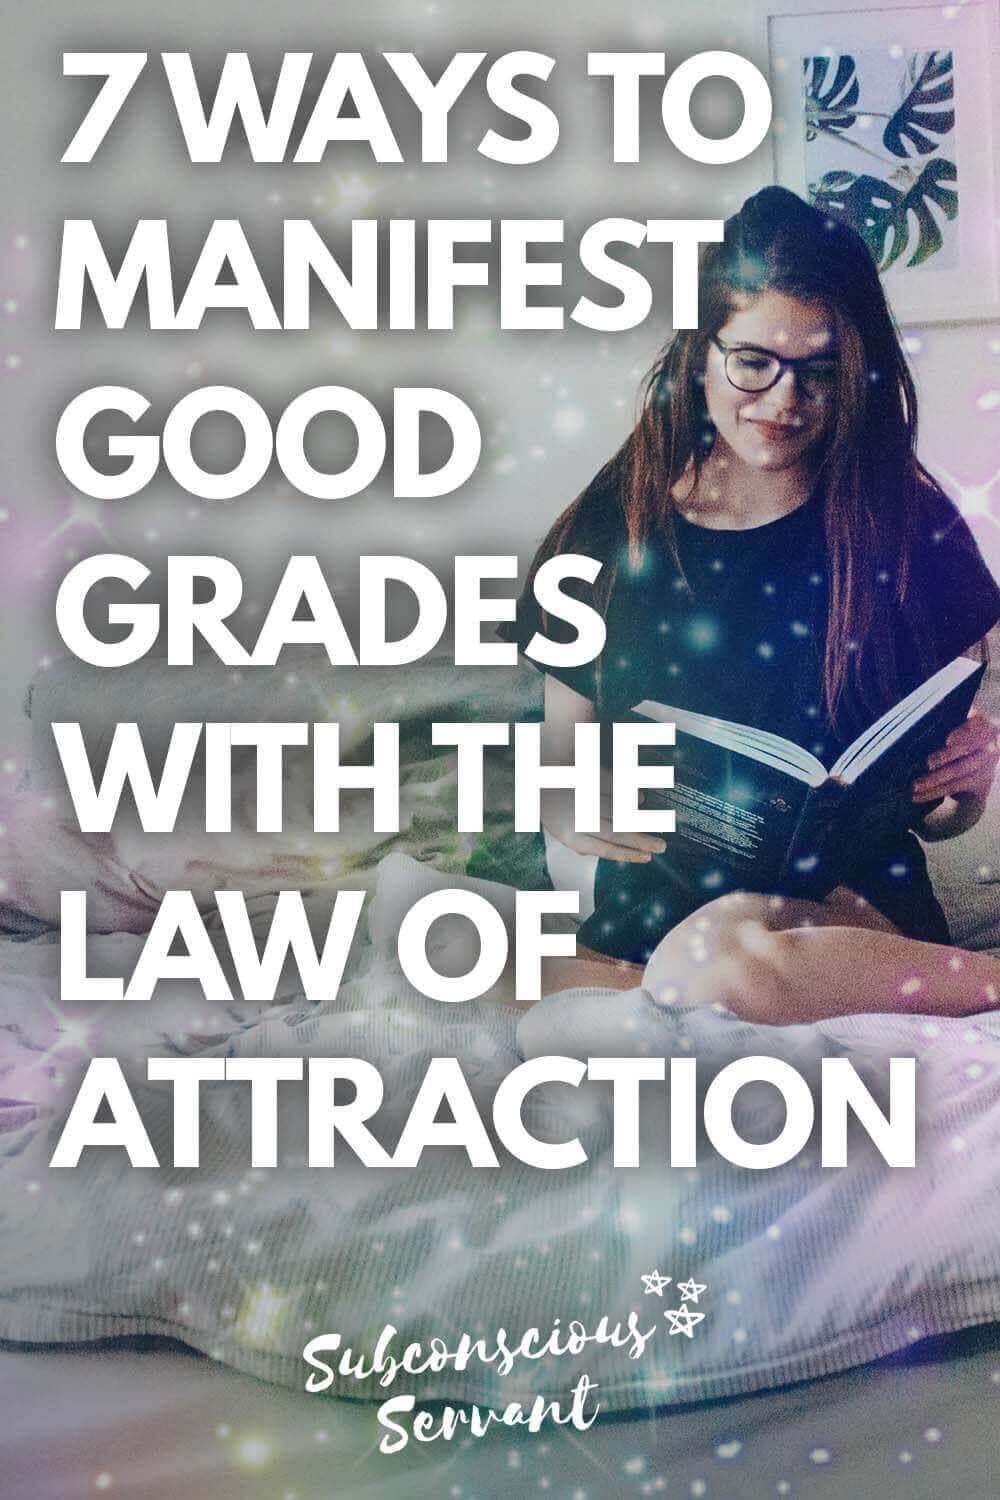 7 Ways To Manifest Good Grades With The Law Of Attraction